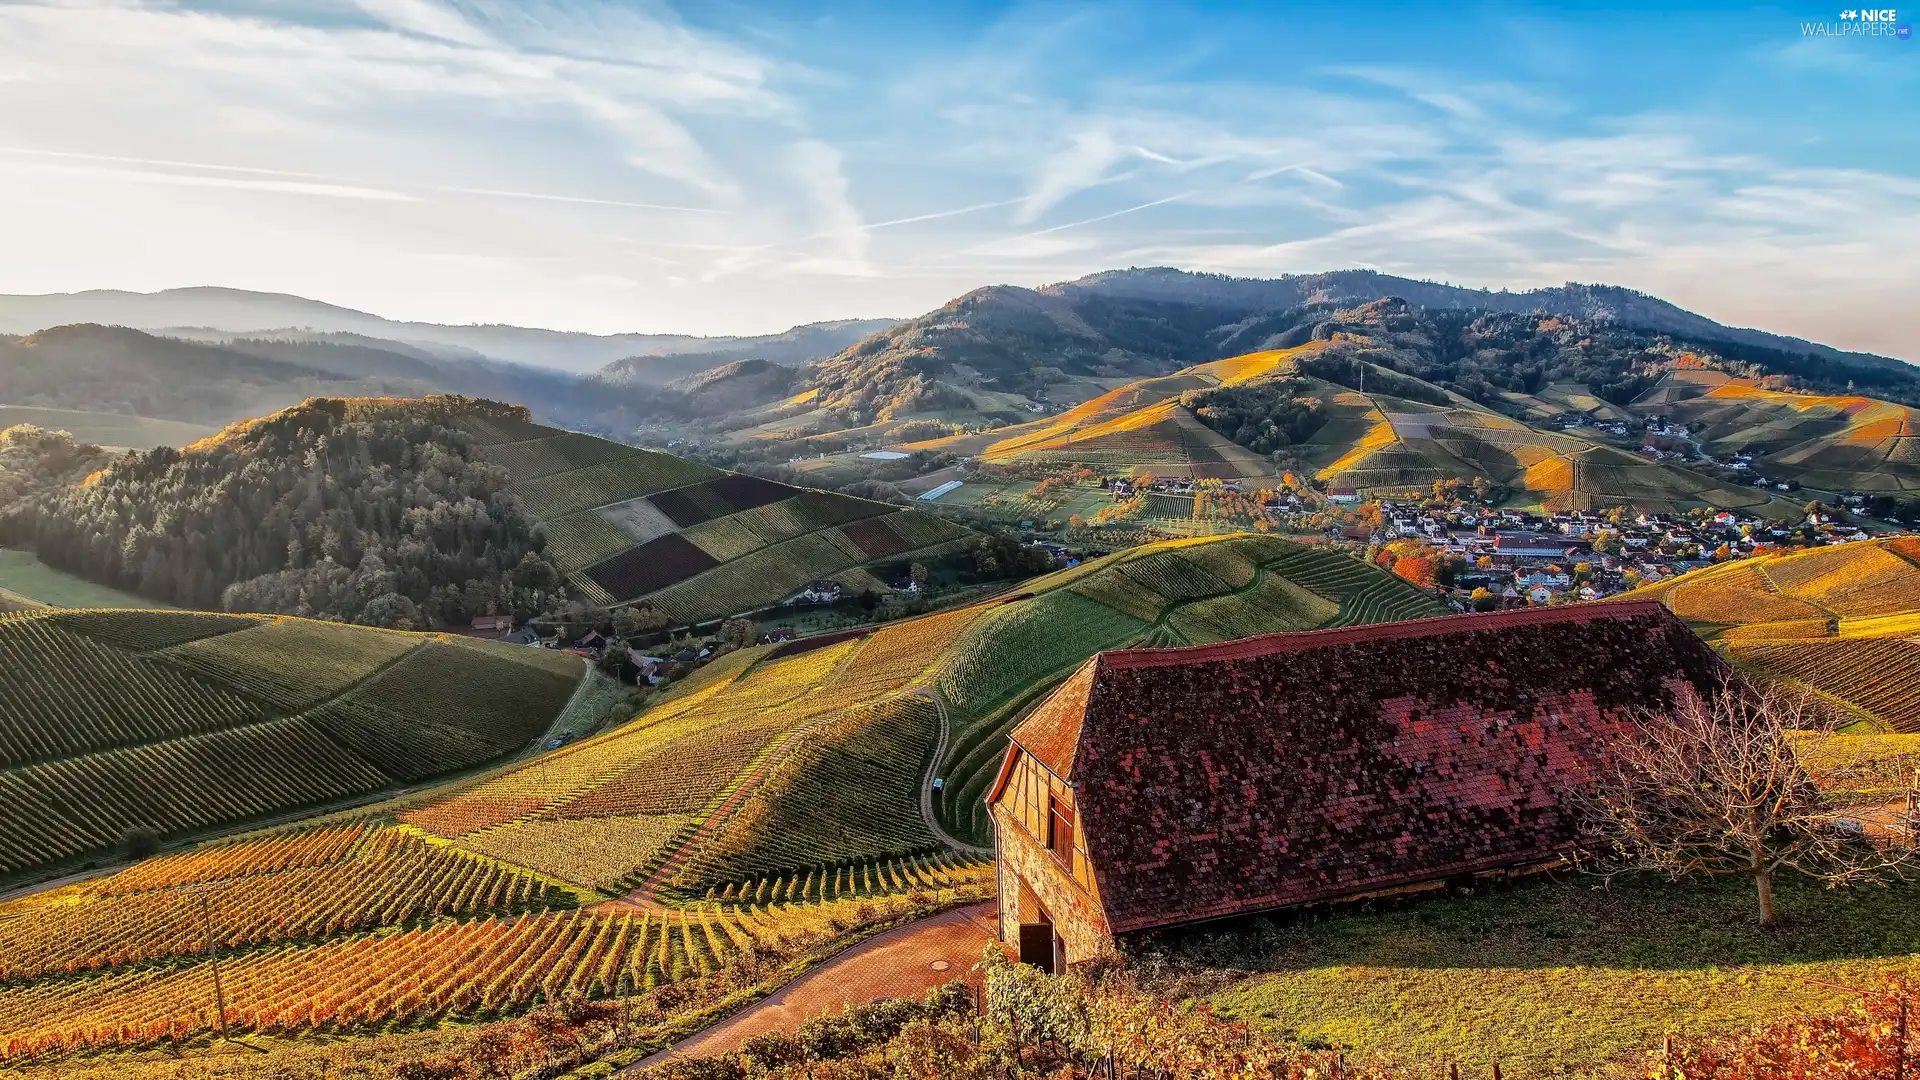 The Hills, field, trees, vineyards, Mountains, house, country